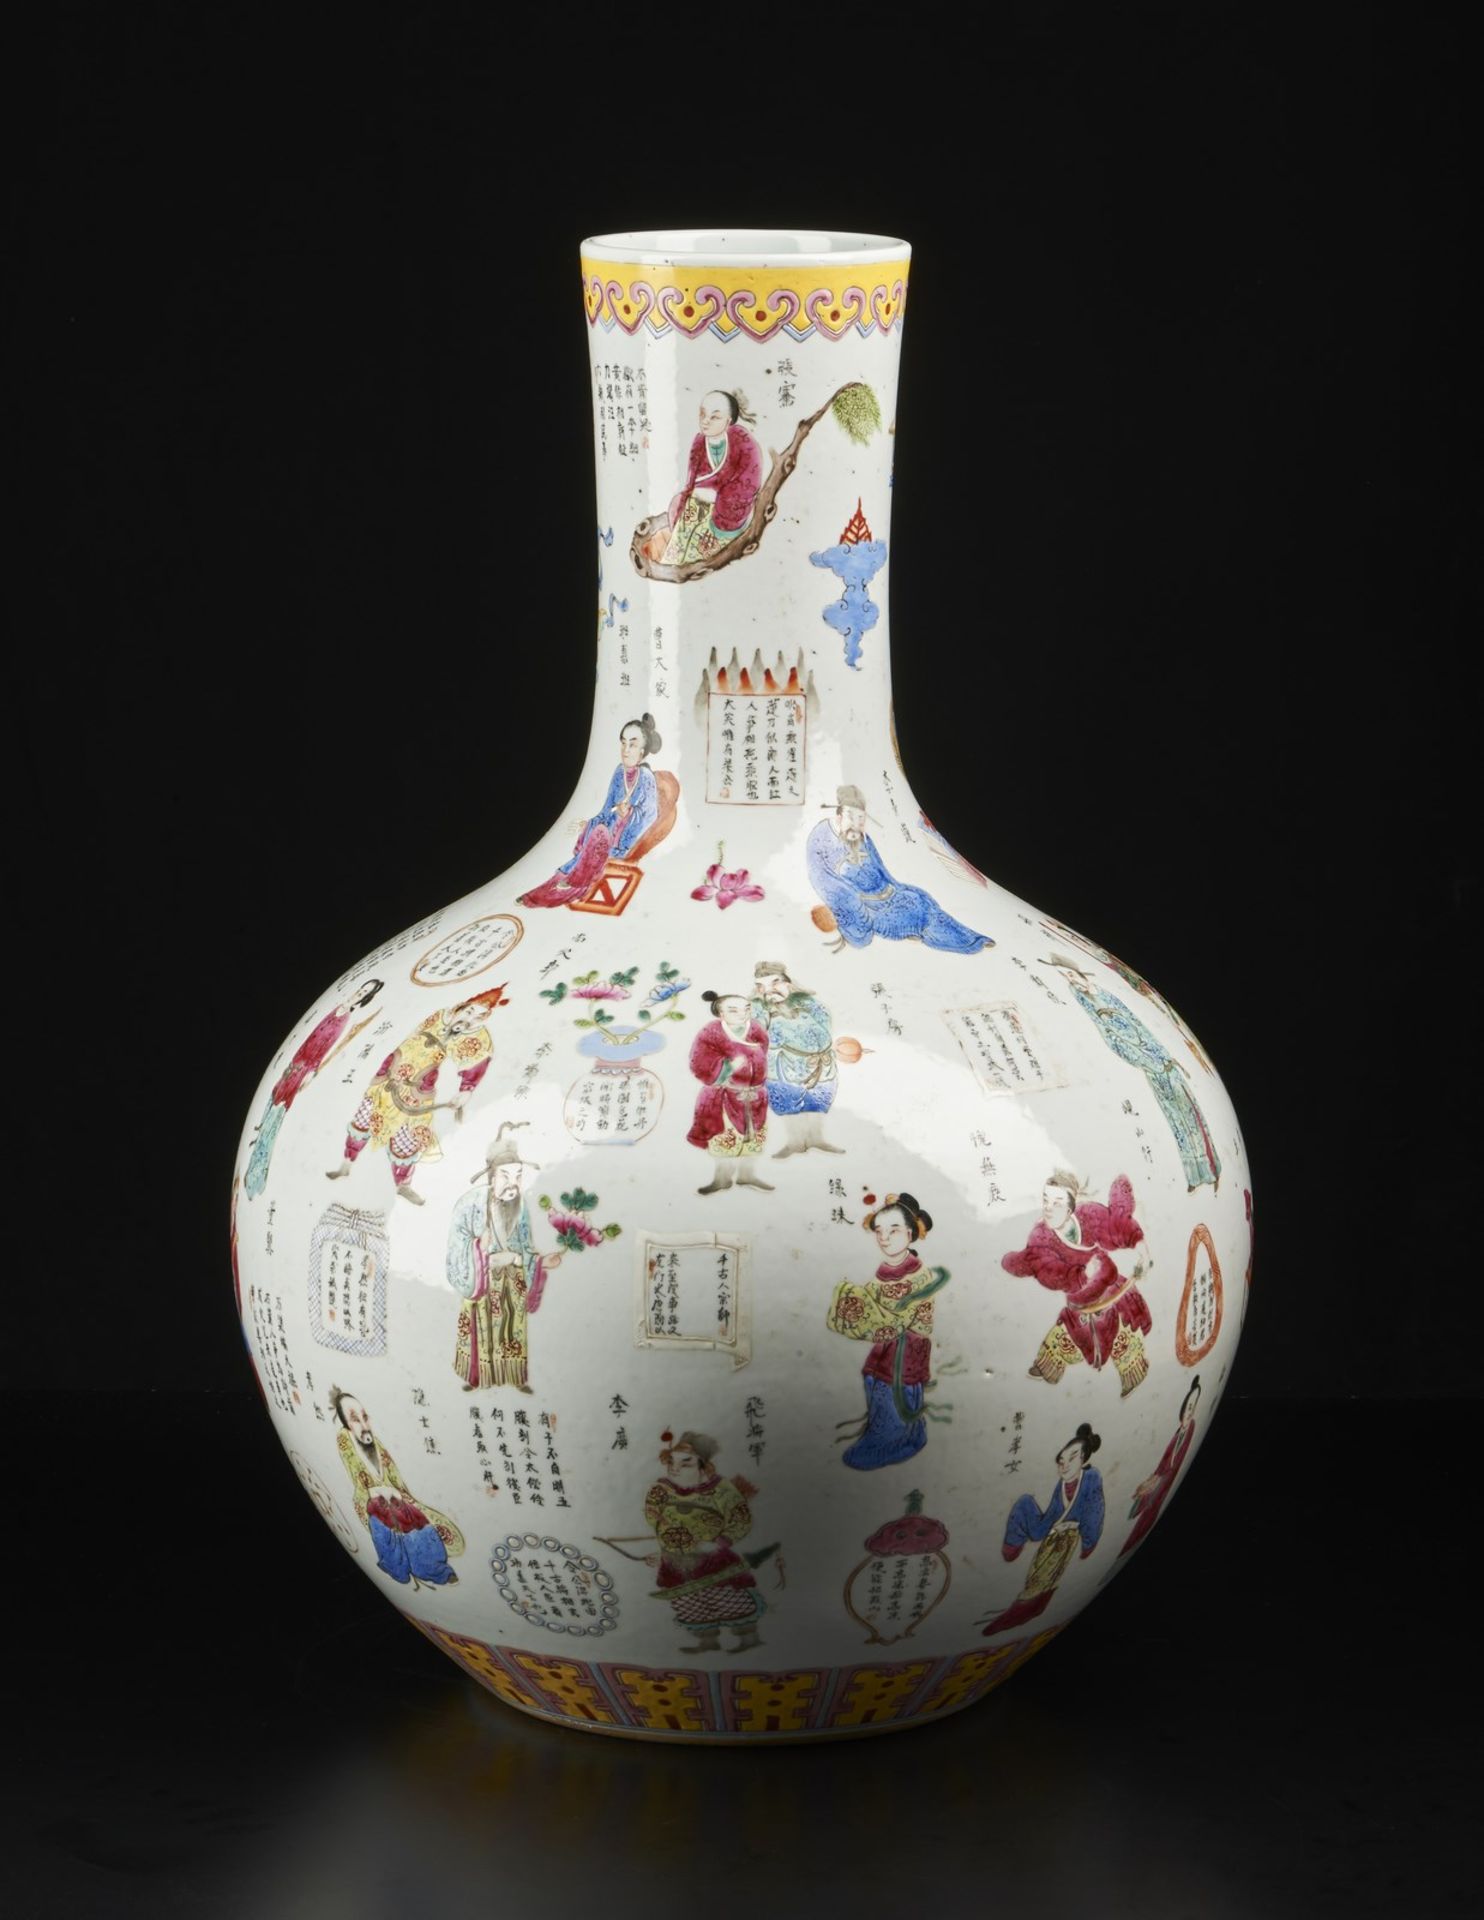 Arte Cinese A large tianchuping porcelain vase painted with characters and long inscriptionsChina, - Bild 2 aus 5